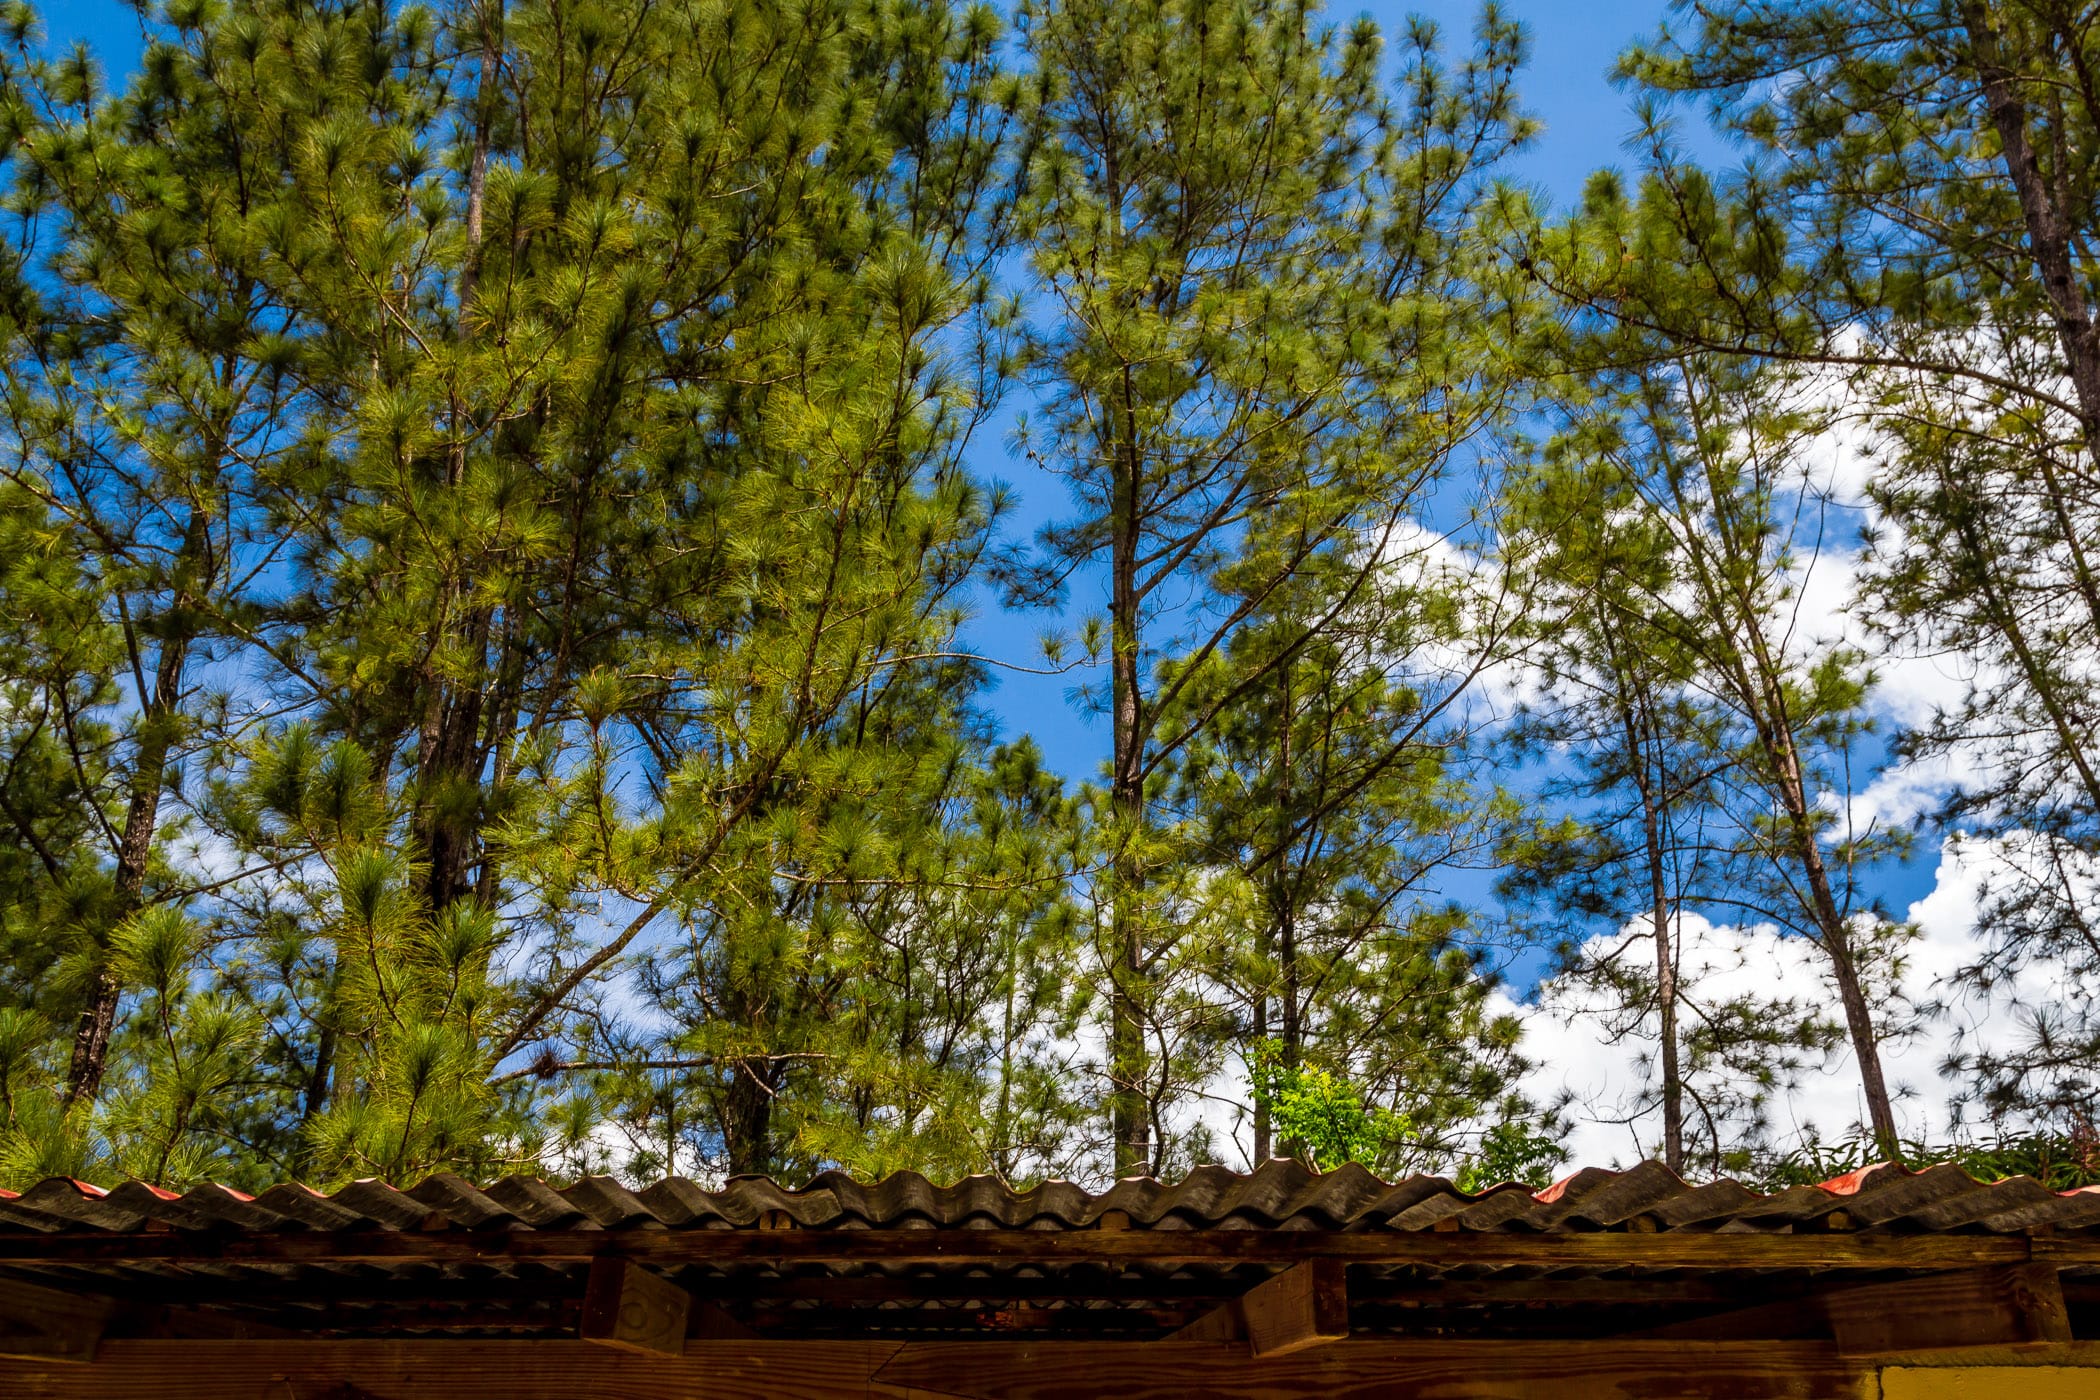 Pine trees rise above the corrugated metal roof of a barn at the Croydon in the Mountains plantation in northwest Jamaica.